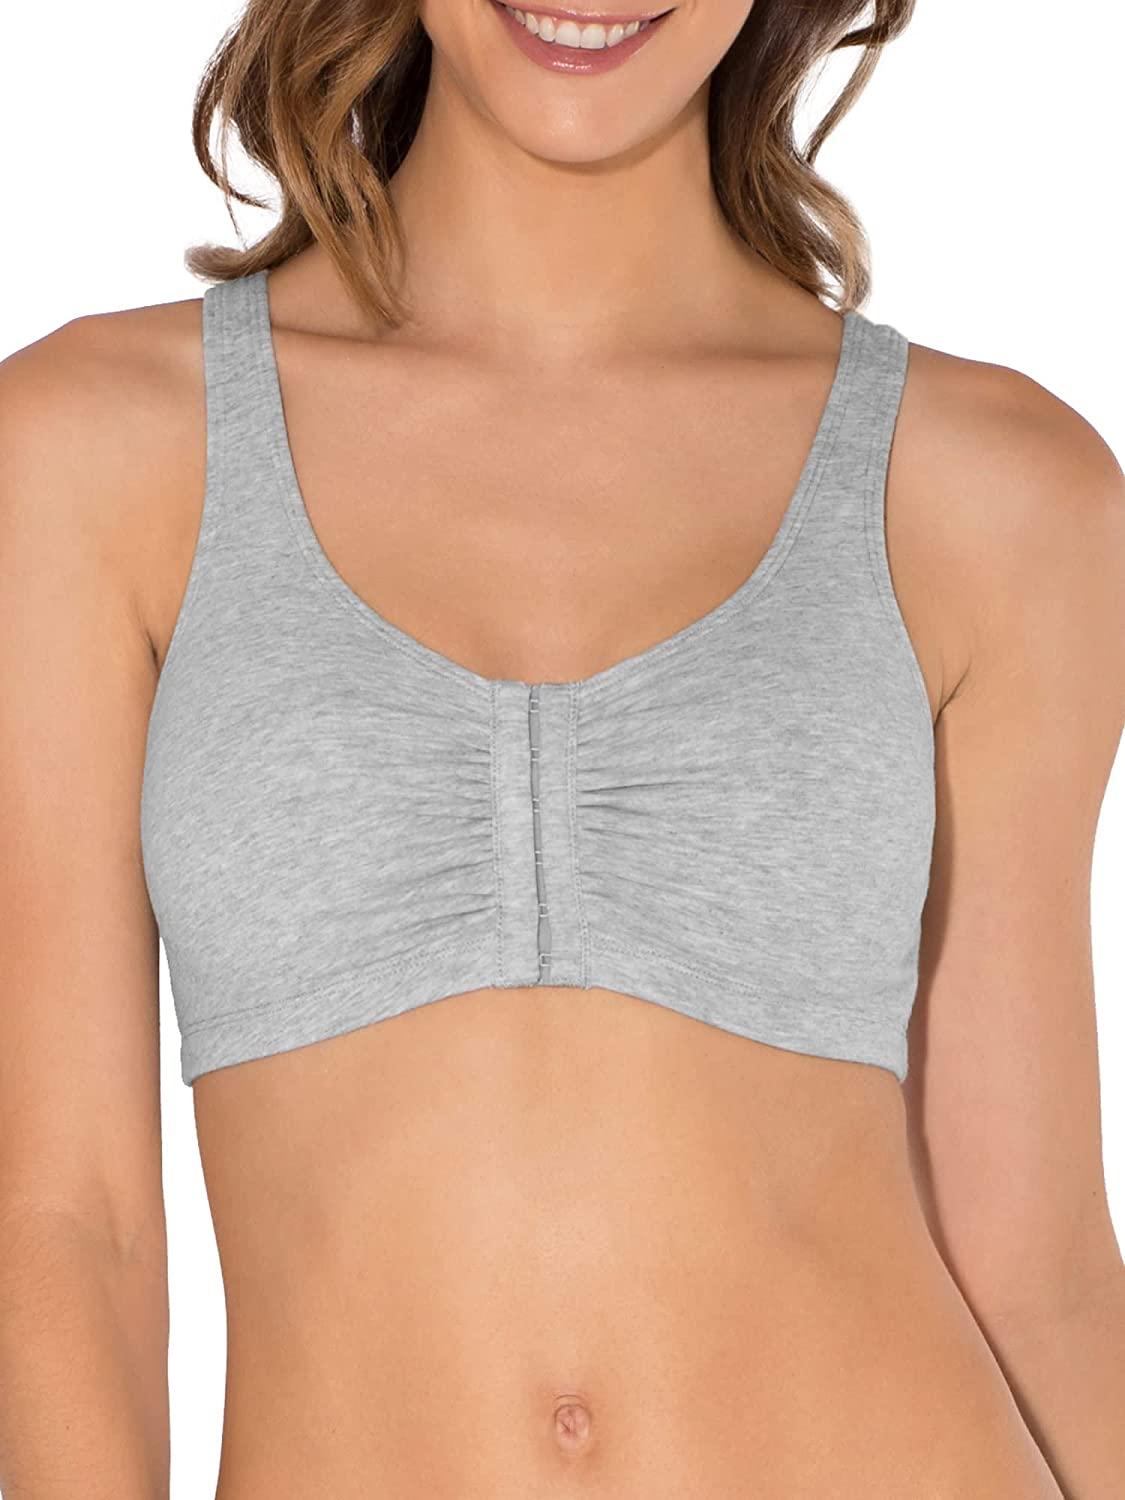  Fruit Of The Loom Womens Front Closure Cotton Sports Bra